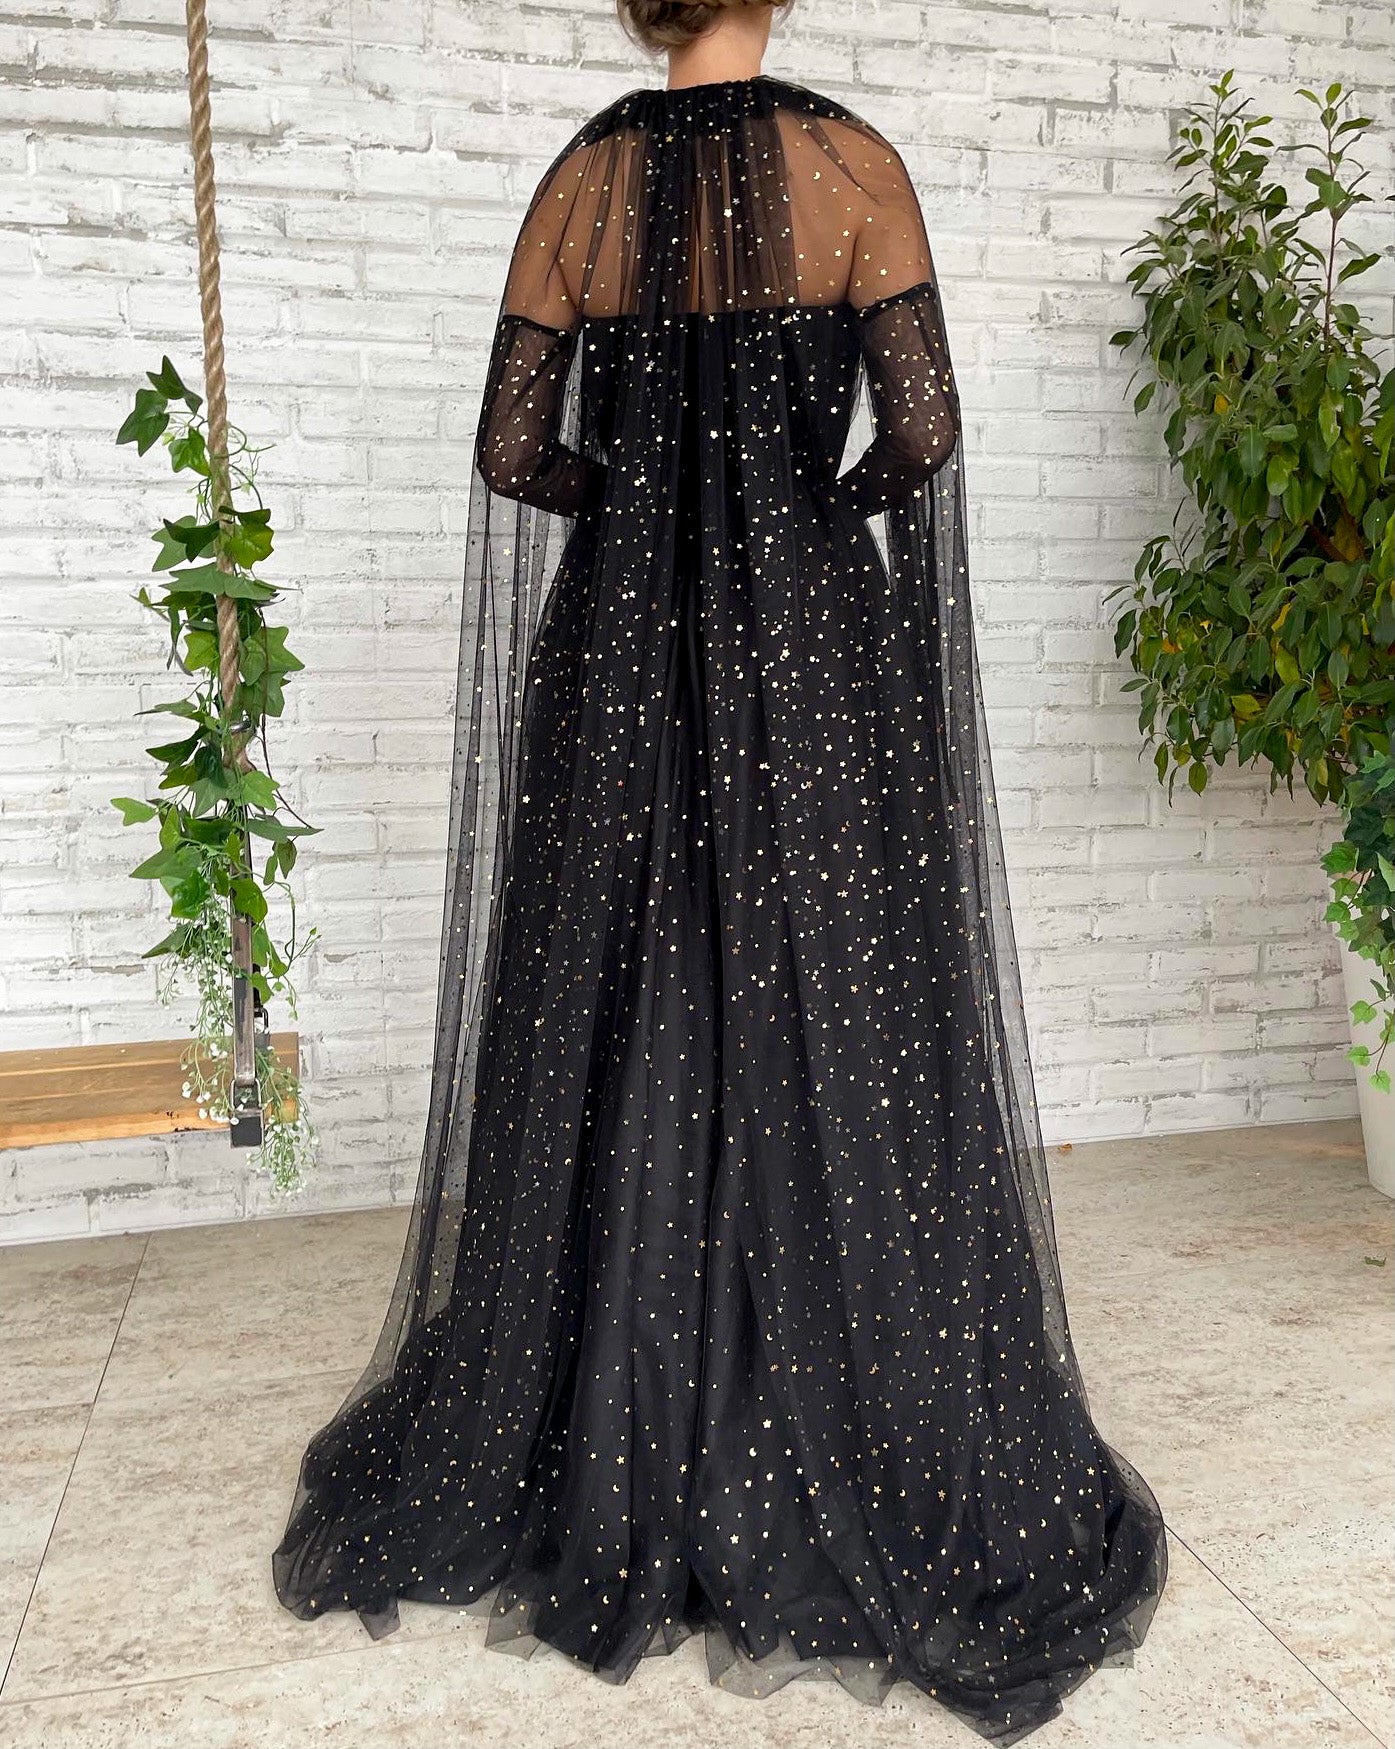 Black A-Line dress with cape sleeves, gloves and starry fabric